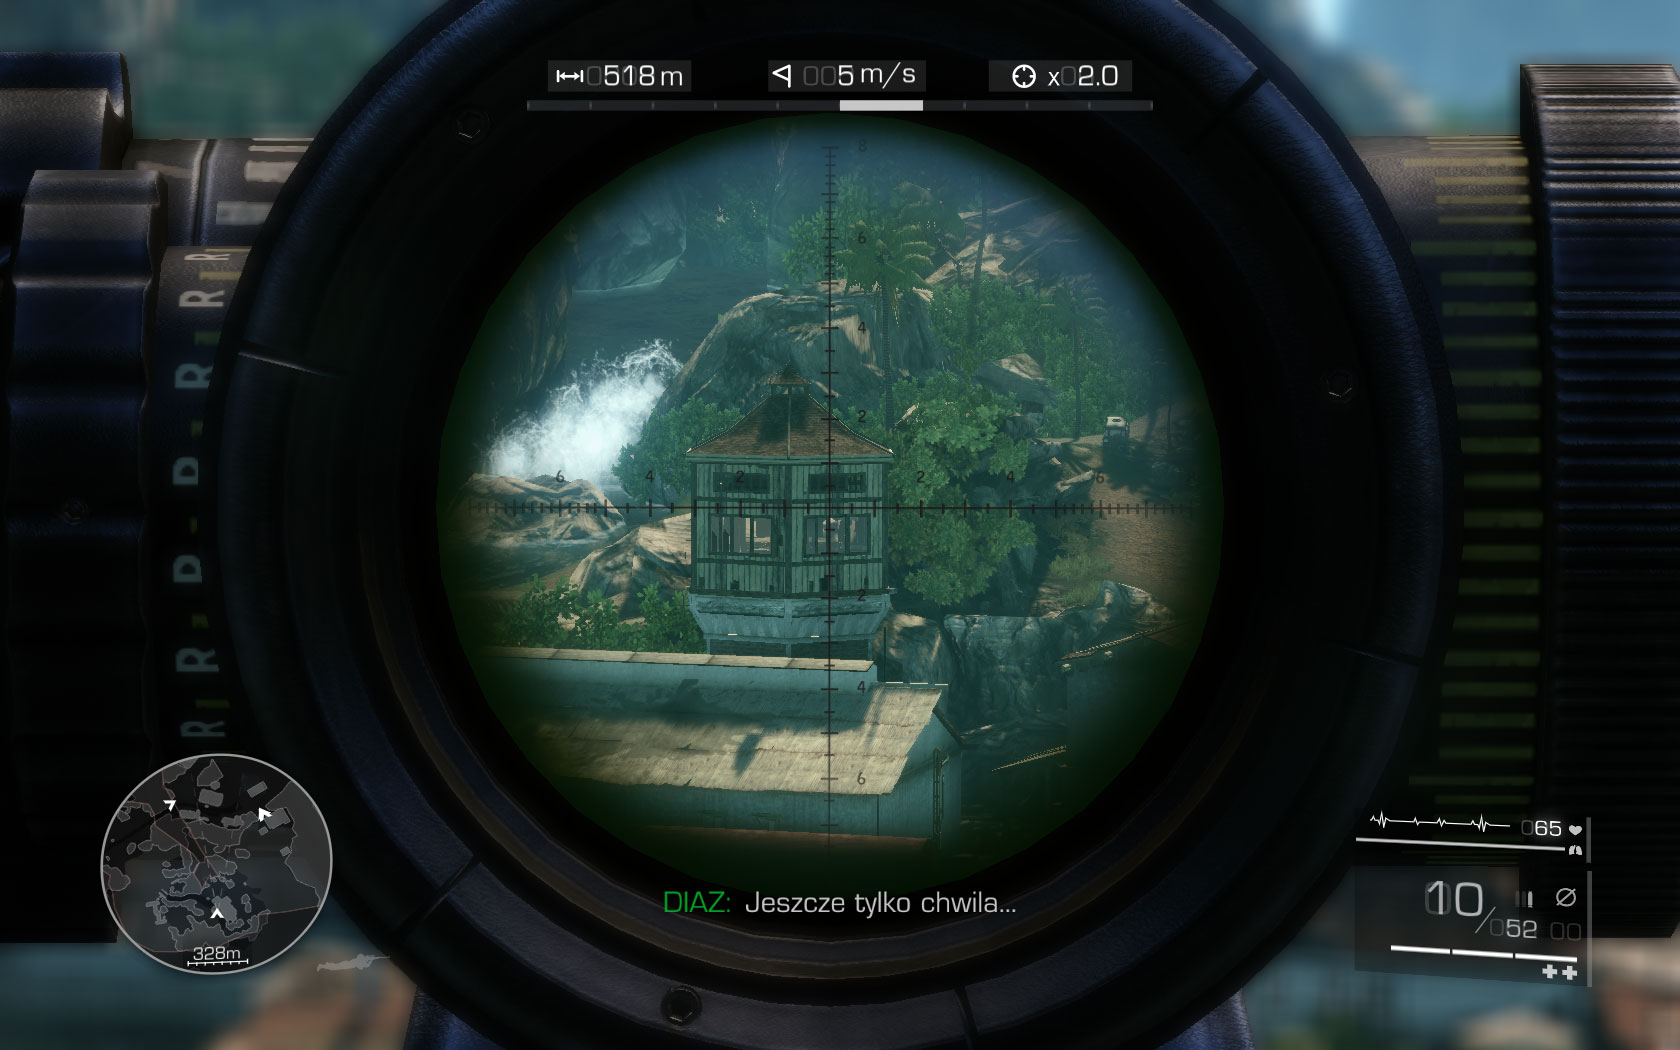 You will be informed of a sniper on the tower [488m] - before you are able to push the trigger, a helicopter will appear - Provide cover for the assault team - Act 1 - Communication Breakdown - Sniper: Ghost Warrior 2 - Game Guide and Walkthrough